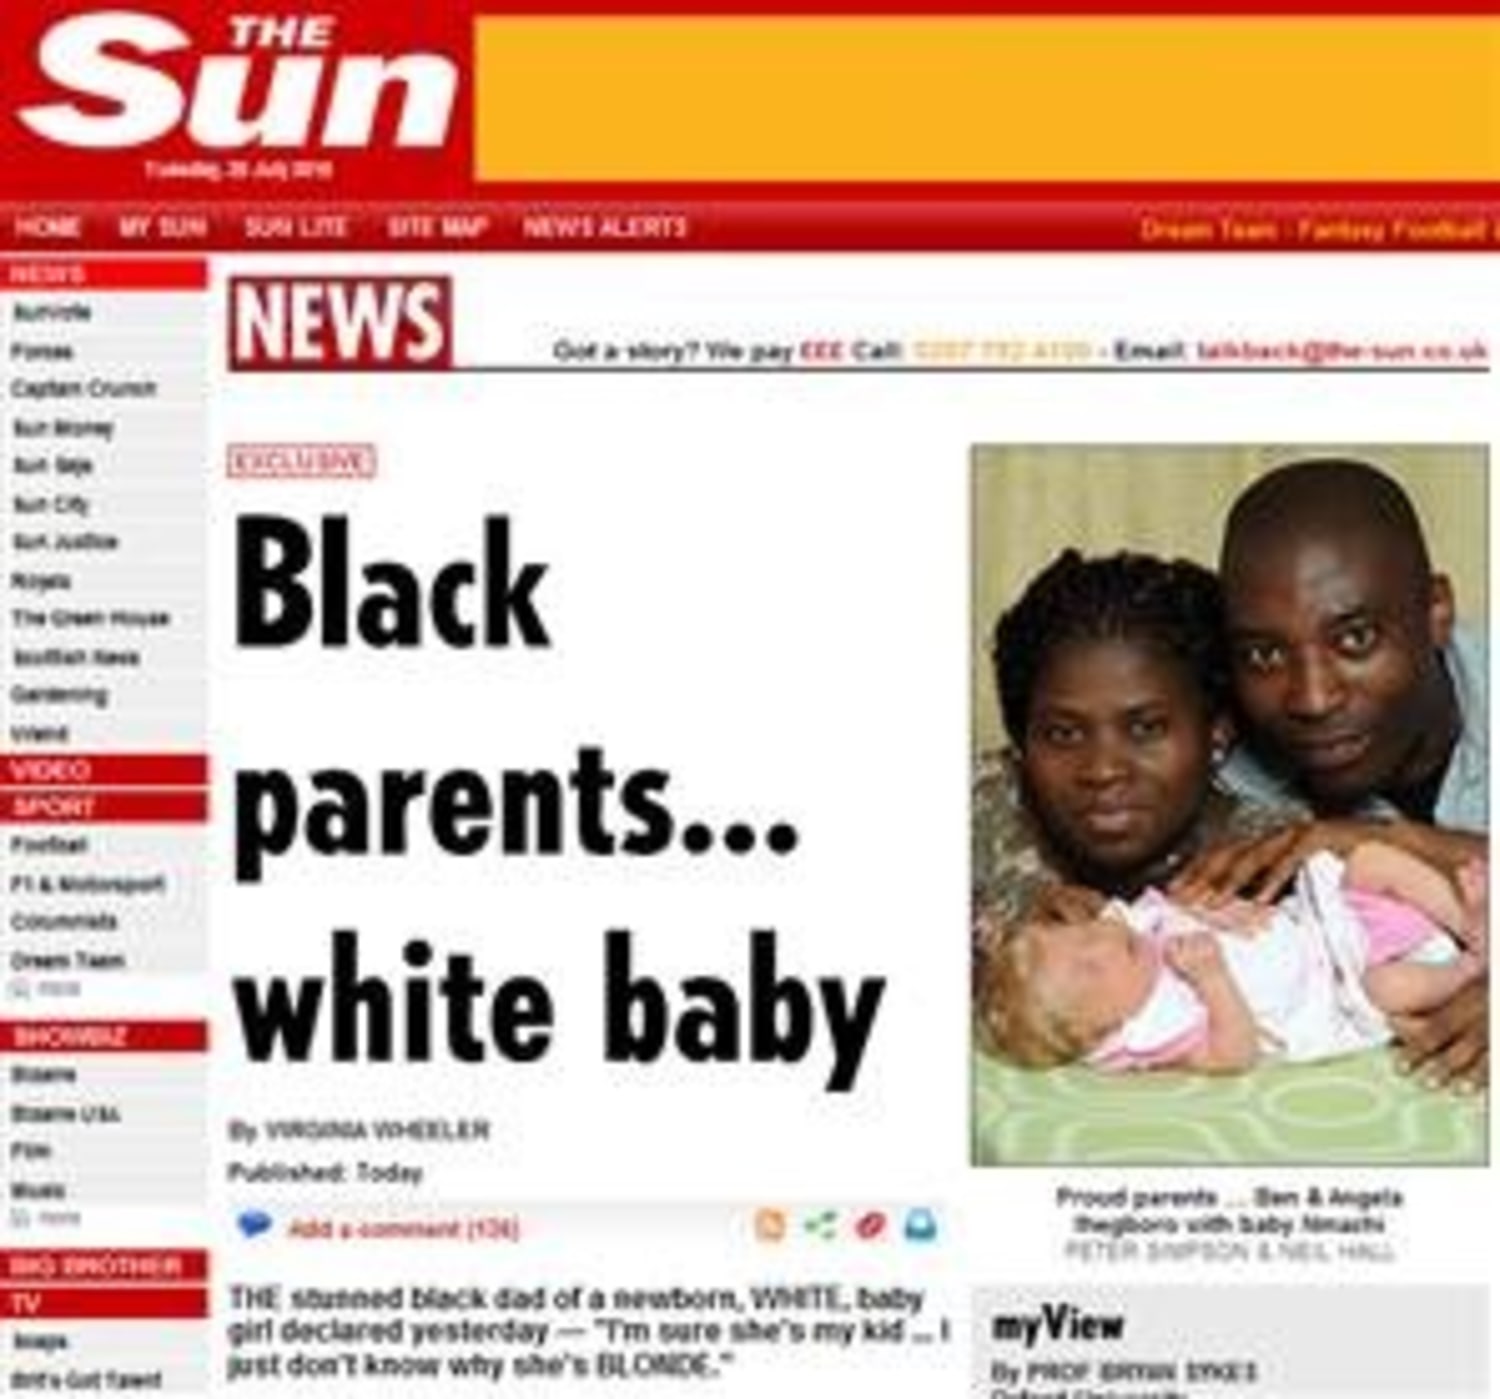 Wife baby black white has 3 Things